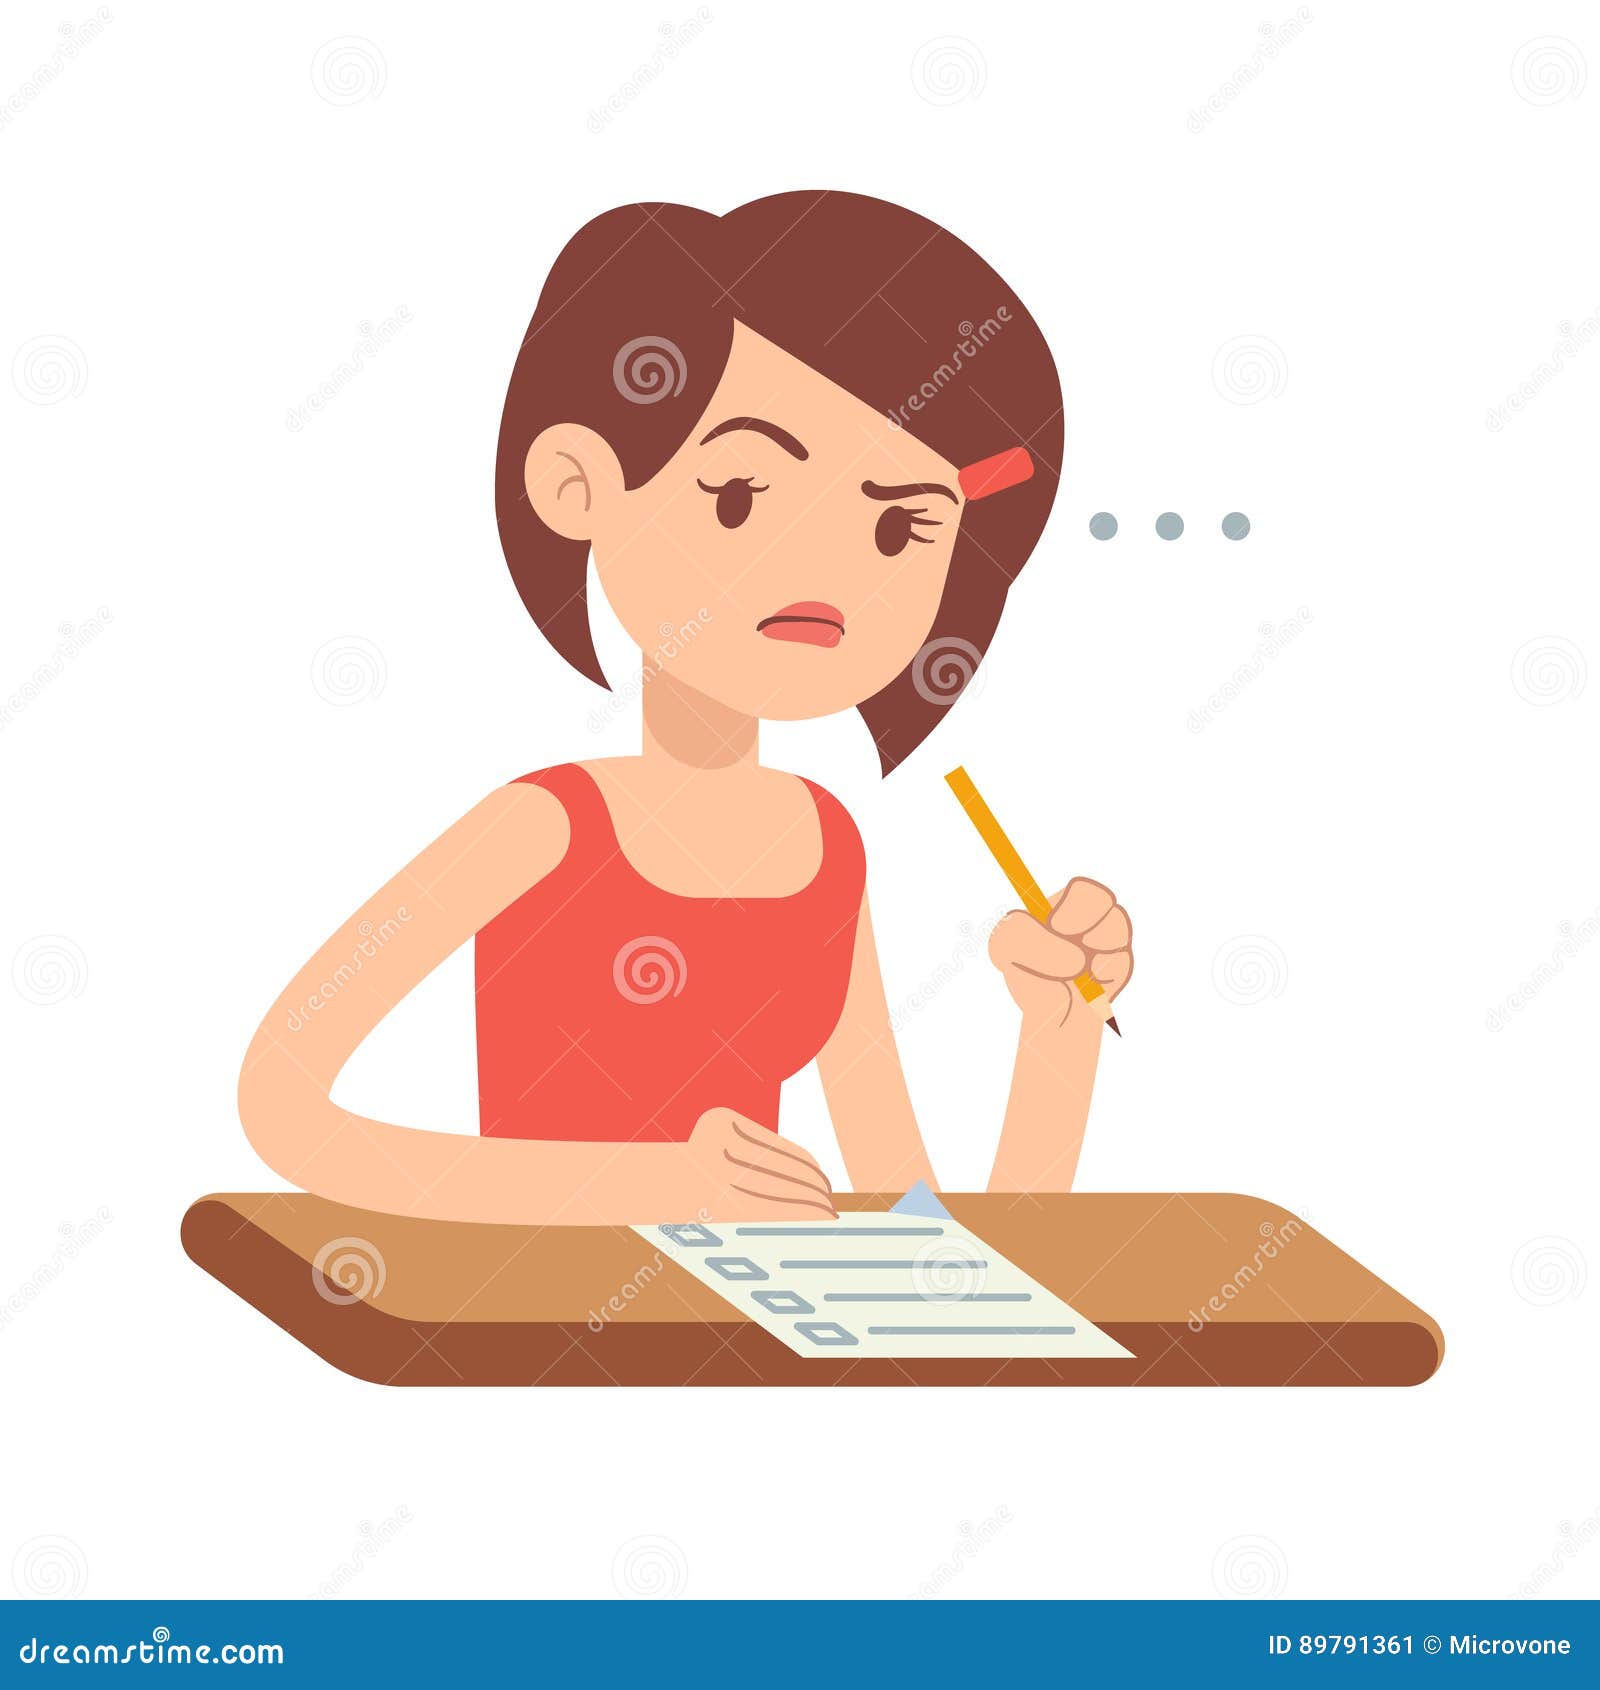 Worried Cartoons, Illustrations & Vector Stock Images - 20957 Pictures